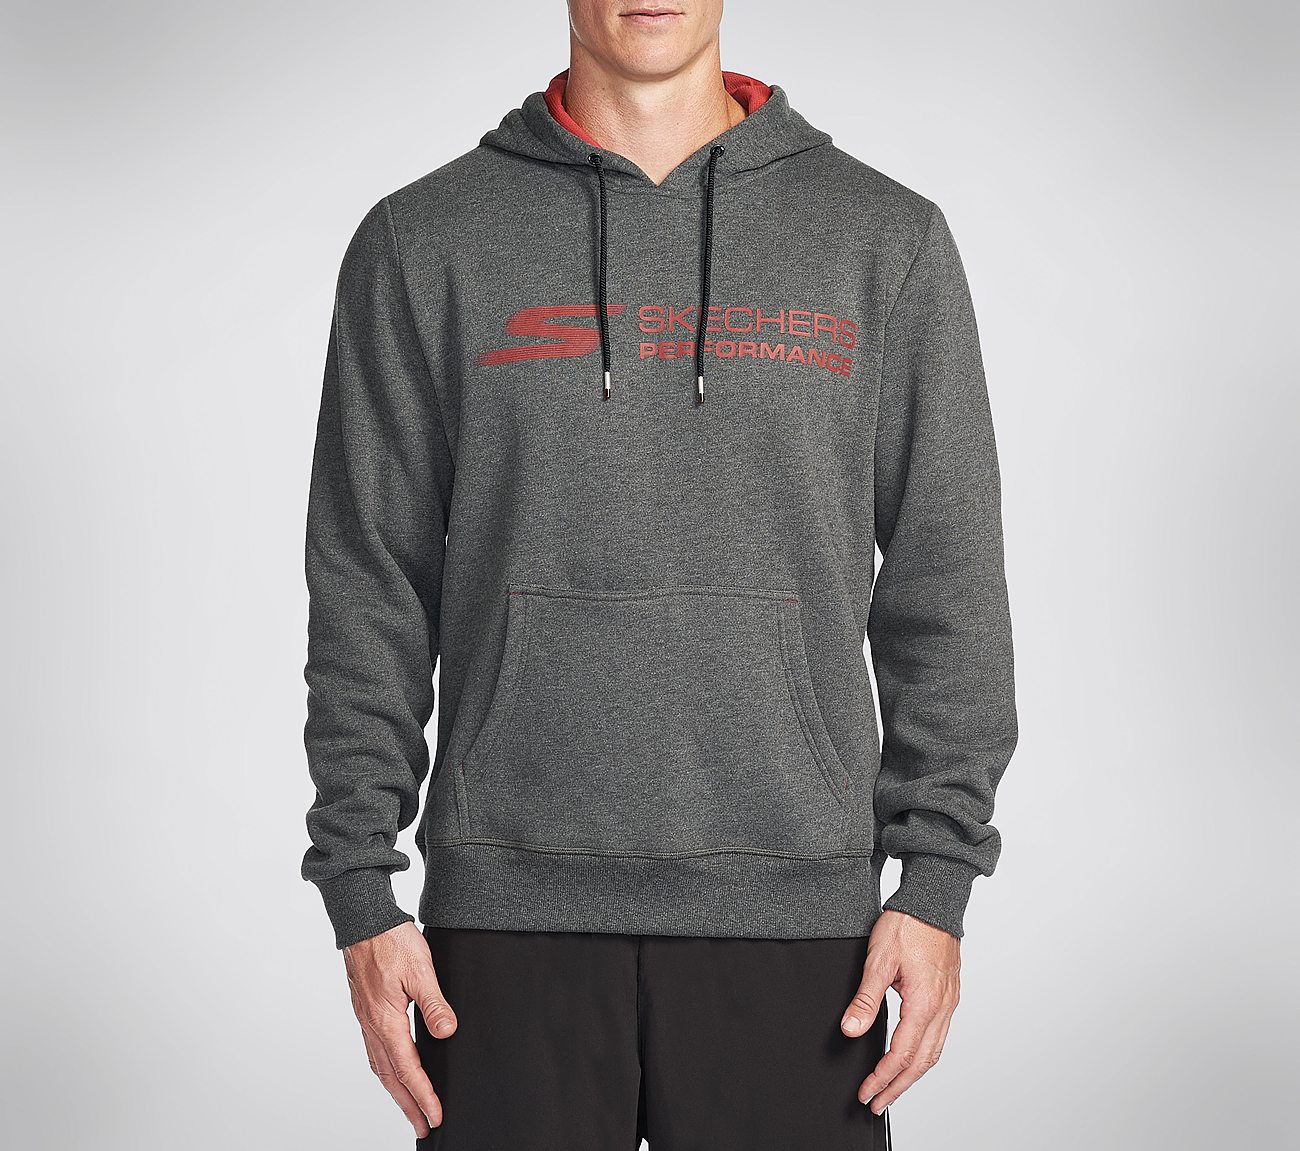 Buy SKECHERS Launch Popover Trailblazer Hoodie Jackets and Hoodies Shoes